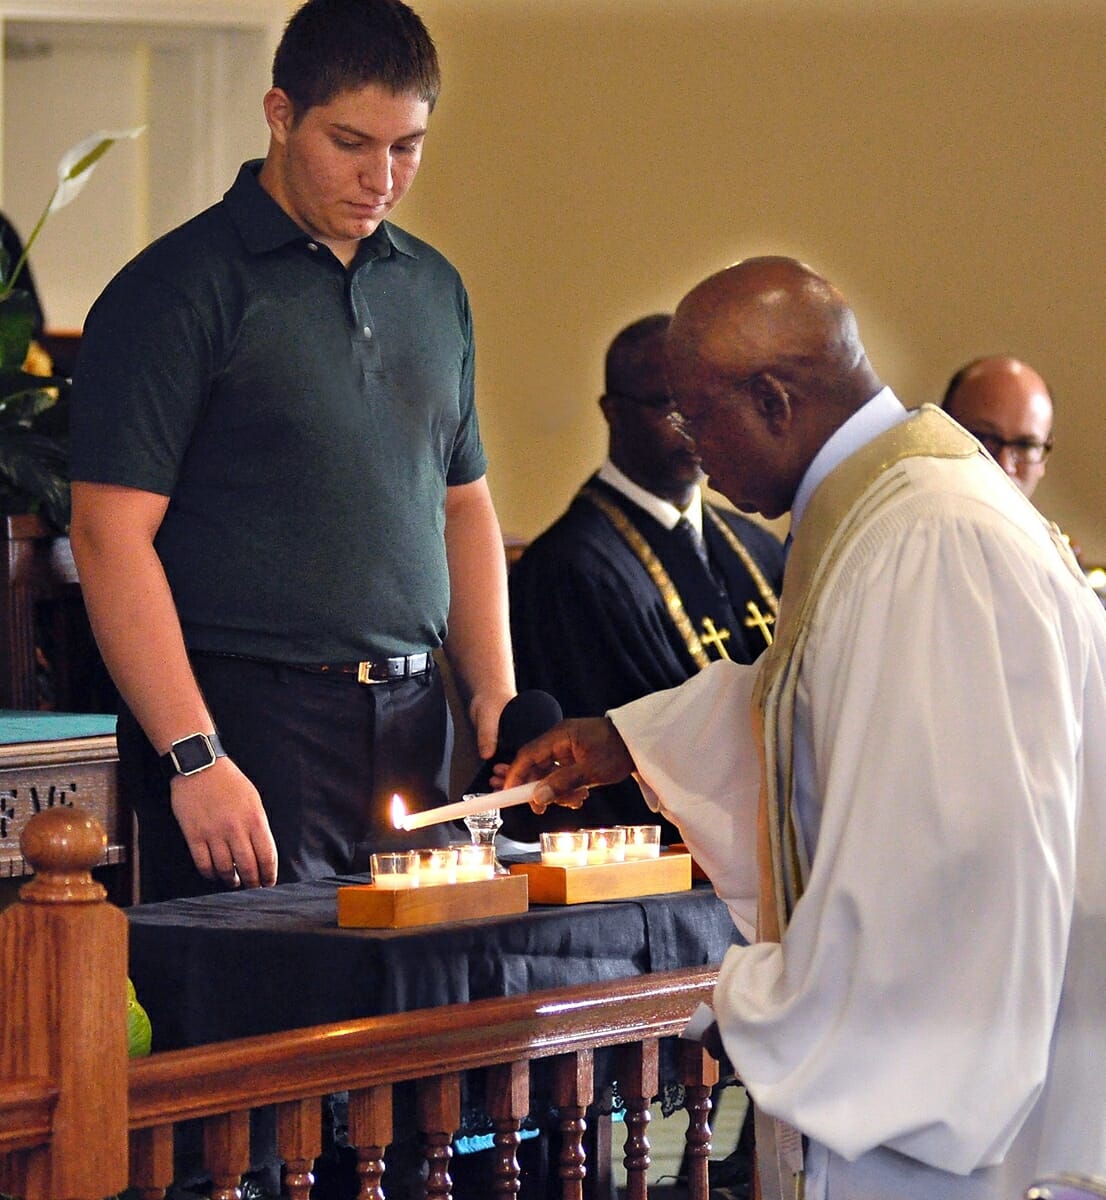 The Rev. Arthur Cummings, right, president of the Beaufort County Ministerial Alliance, lights the last candle on June 16 in memory of the “Emanuel Nine” who were murdered two years ago while attending Emanuel AME Church in Charleston. The candles were part of the Evening of Remembrance Memorial Candlelight Service sponsored by the Unified Interfaith Community Coalition of Beaufort at Grace Chapel AME Church on Lady’s Island. 